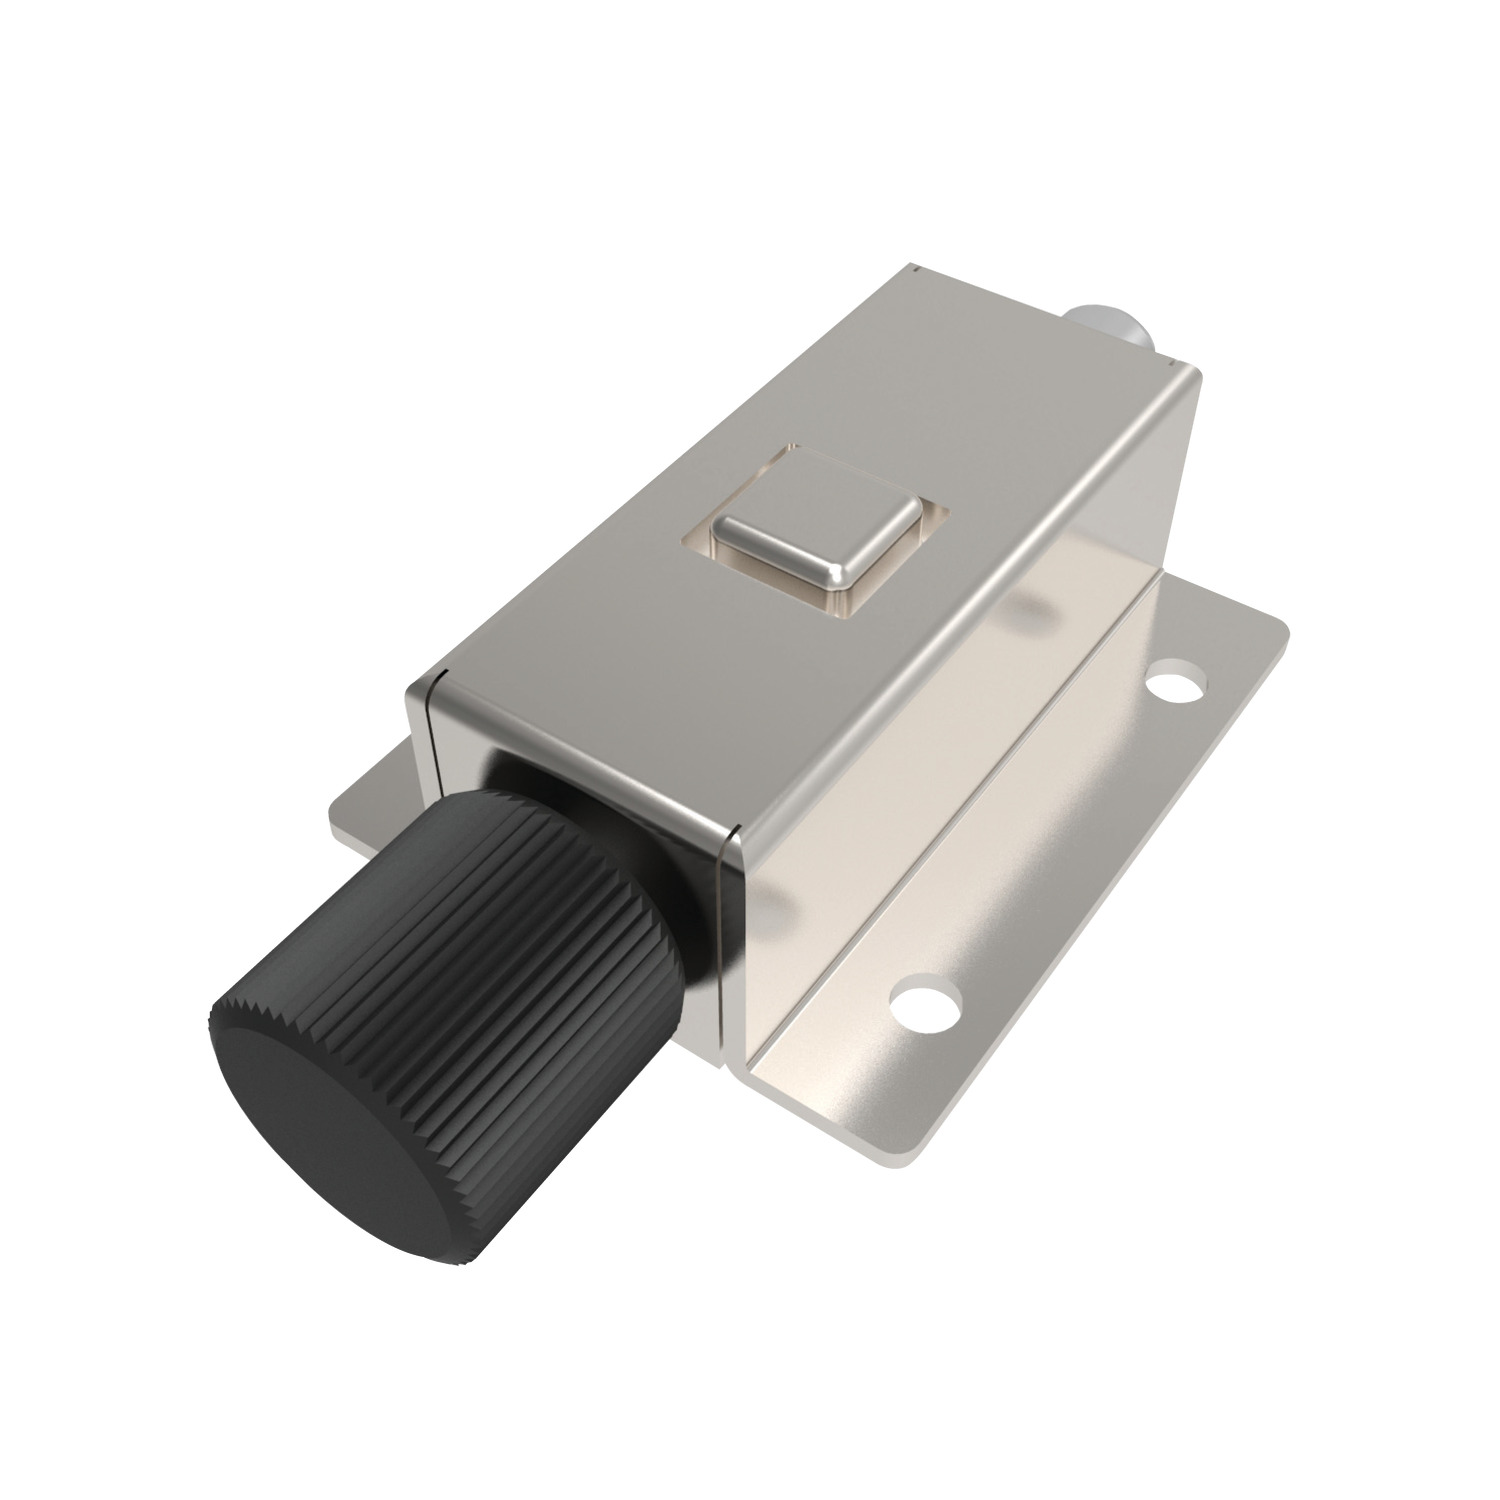 Product J6262, Slide Bar Latch stainless steel / 